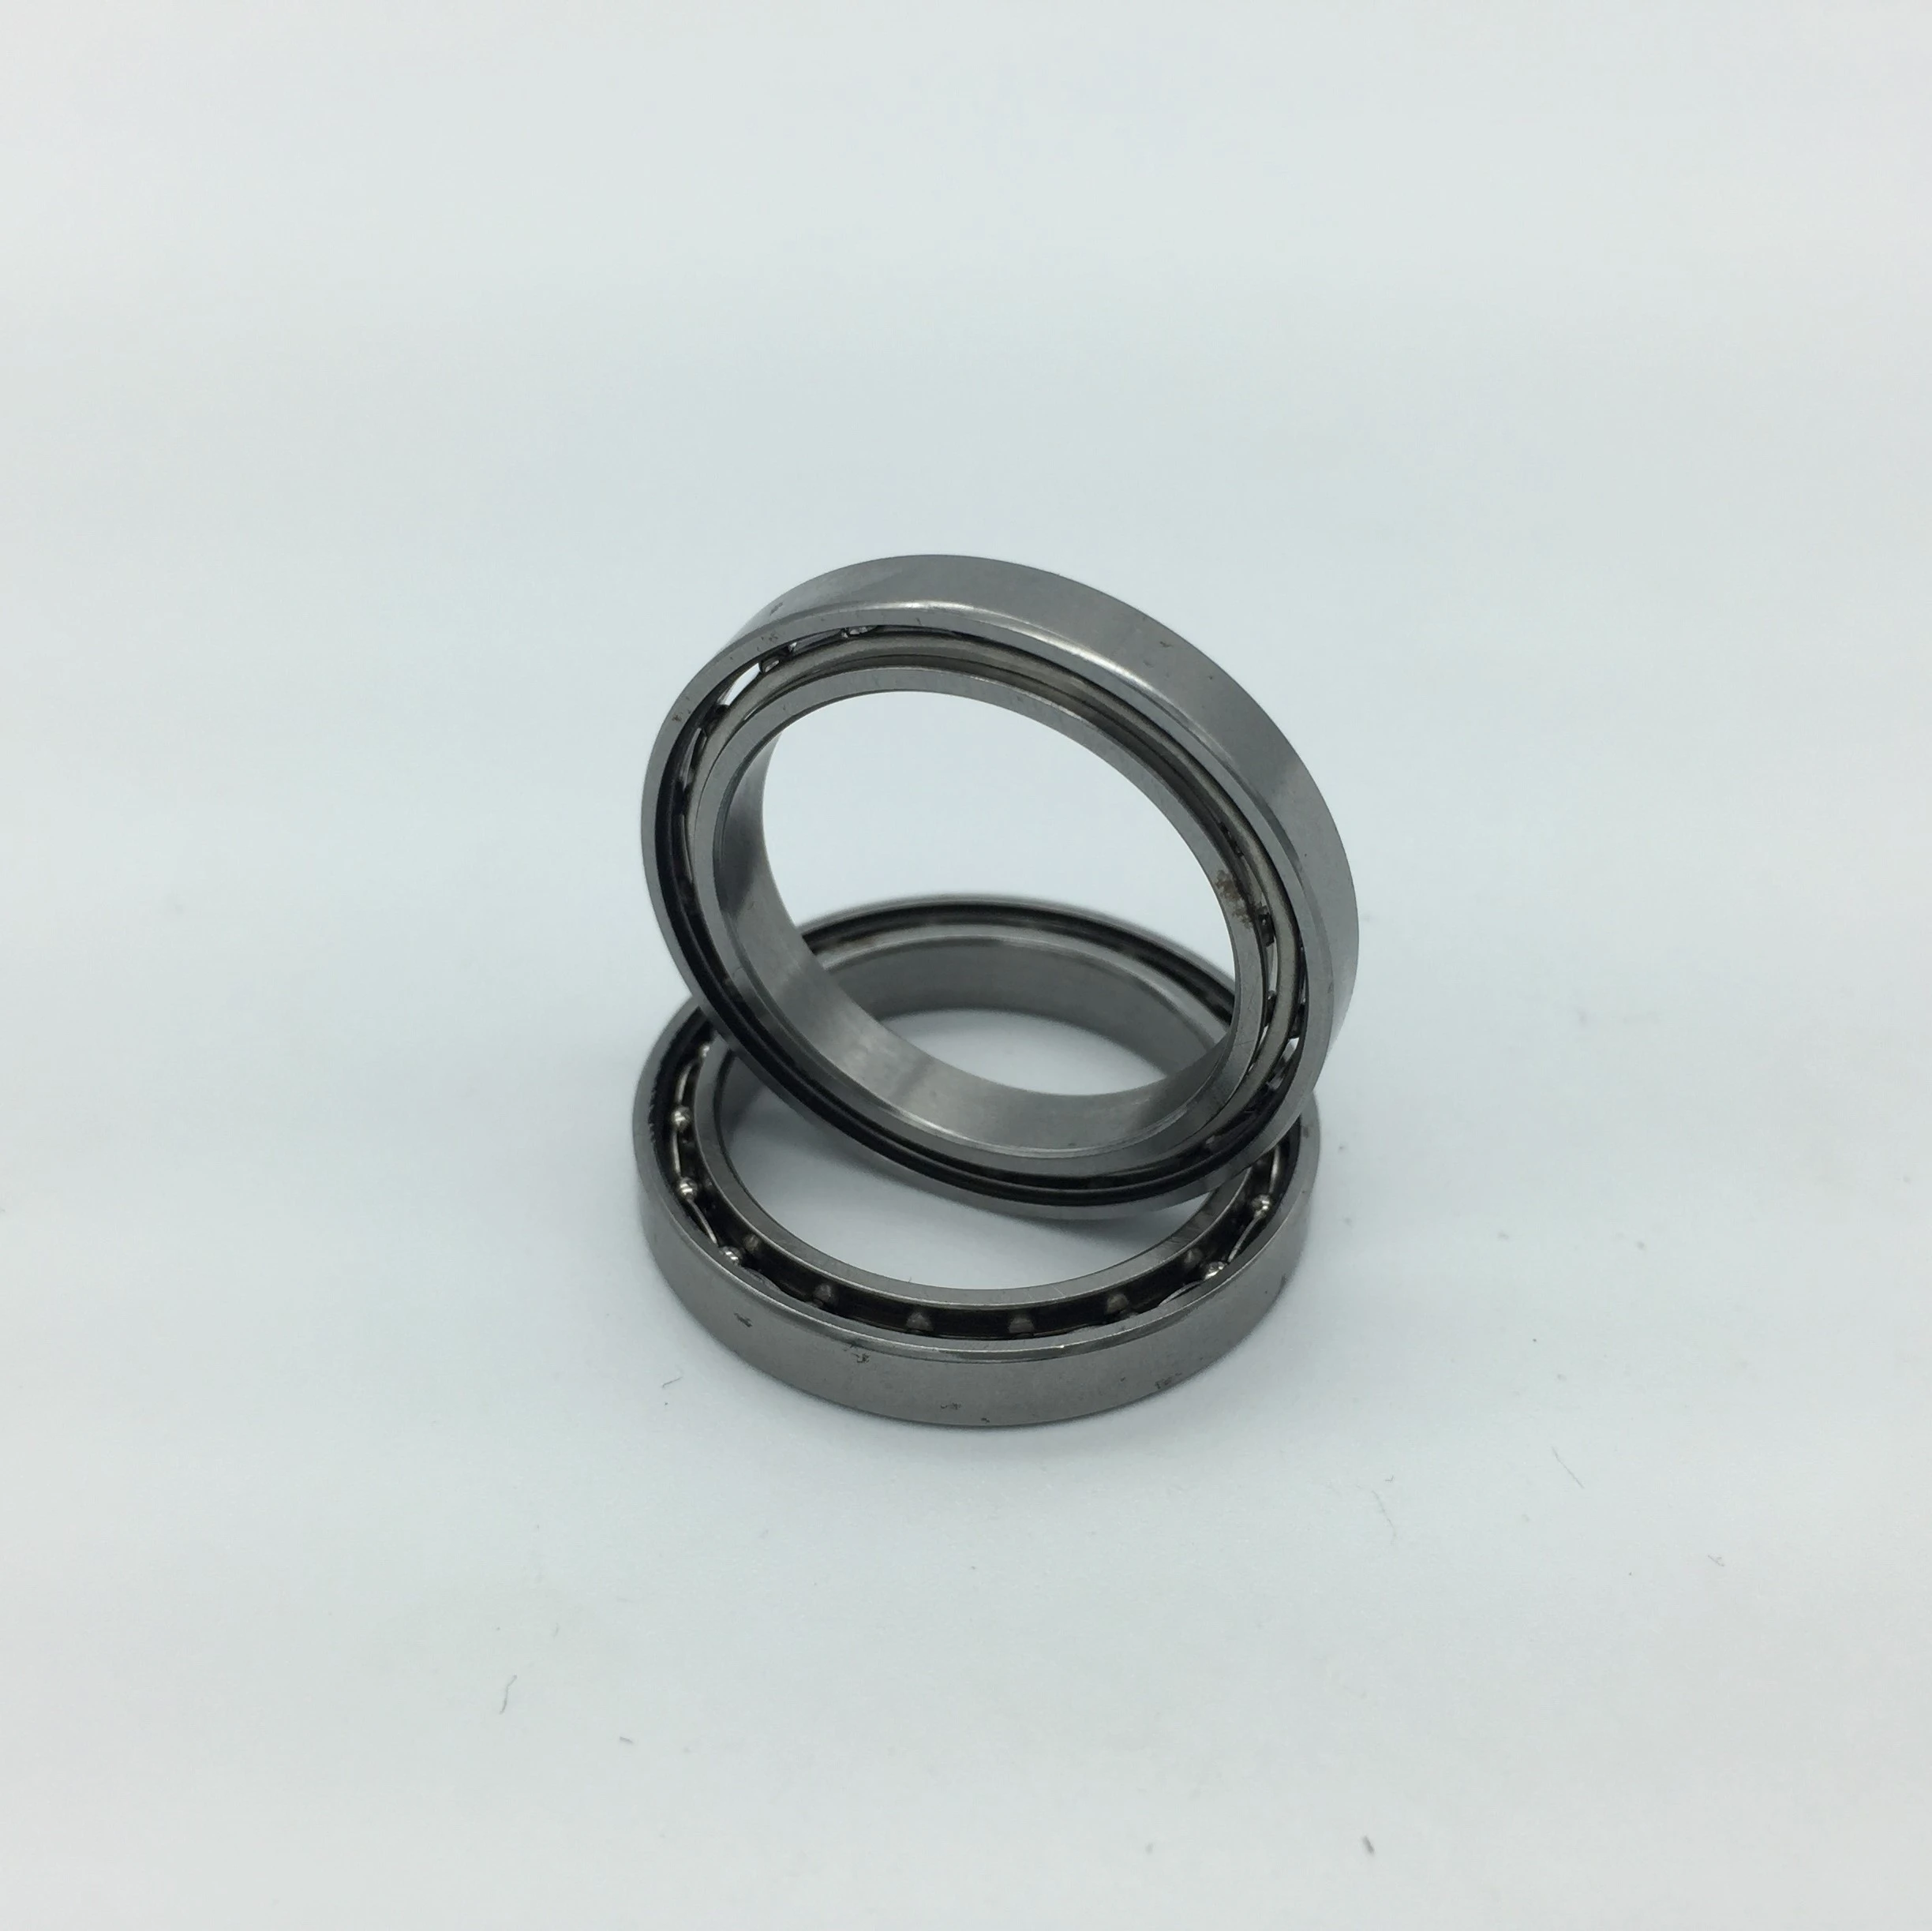 High Quality 6704zz 6704 Bearings 20x27x4 mm Industry Motor Spindle Bearing Accessories